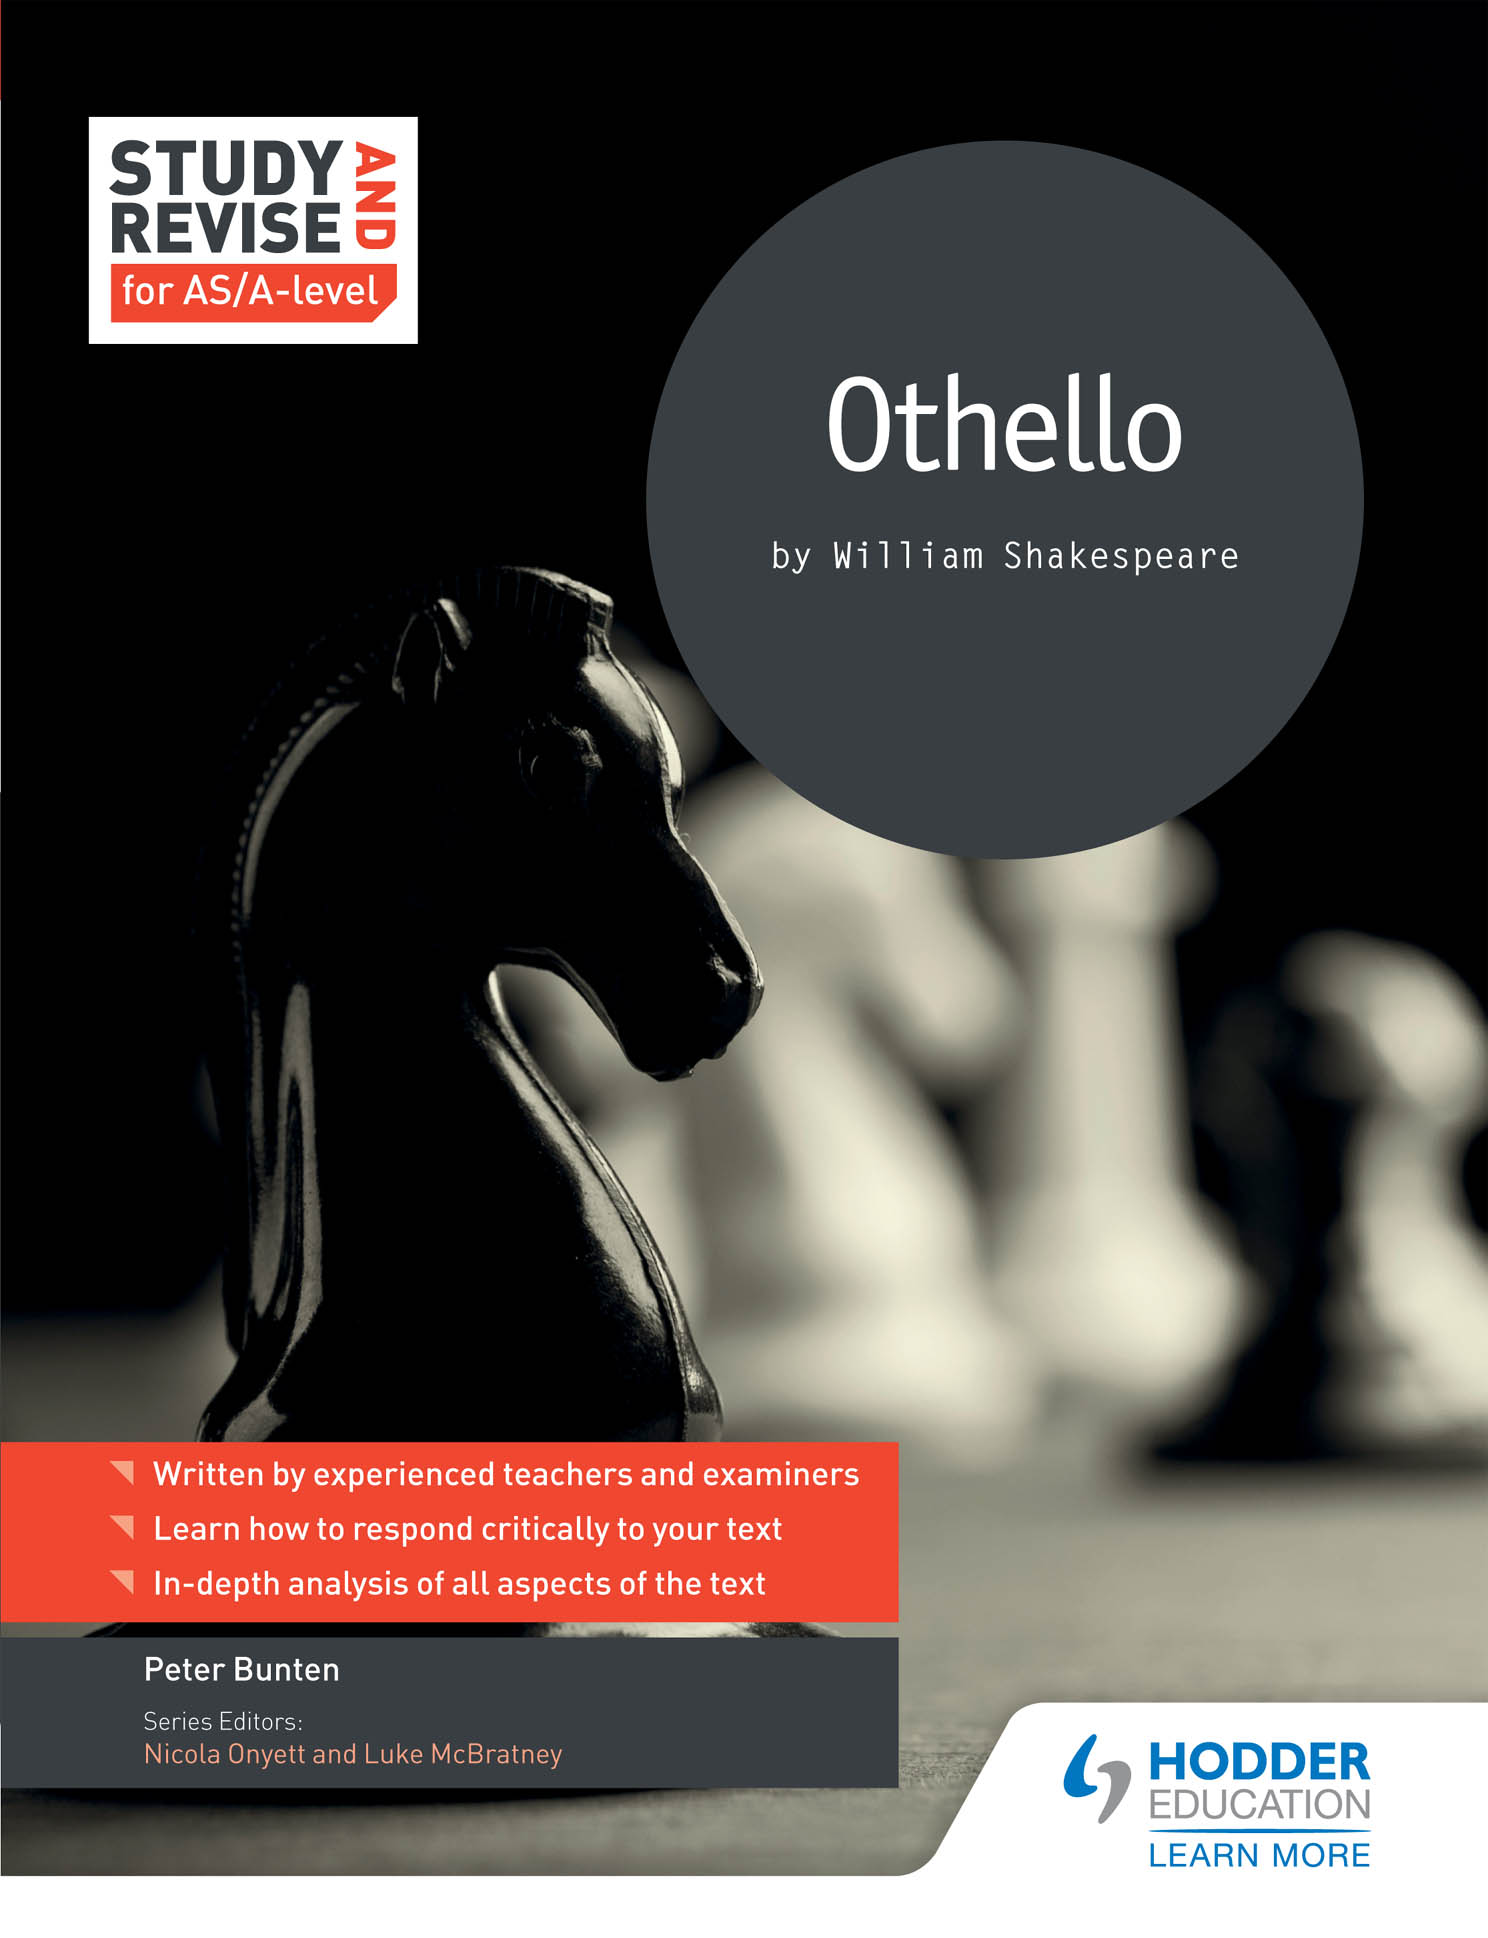 Study and Revise for AS/A-level: Othello